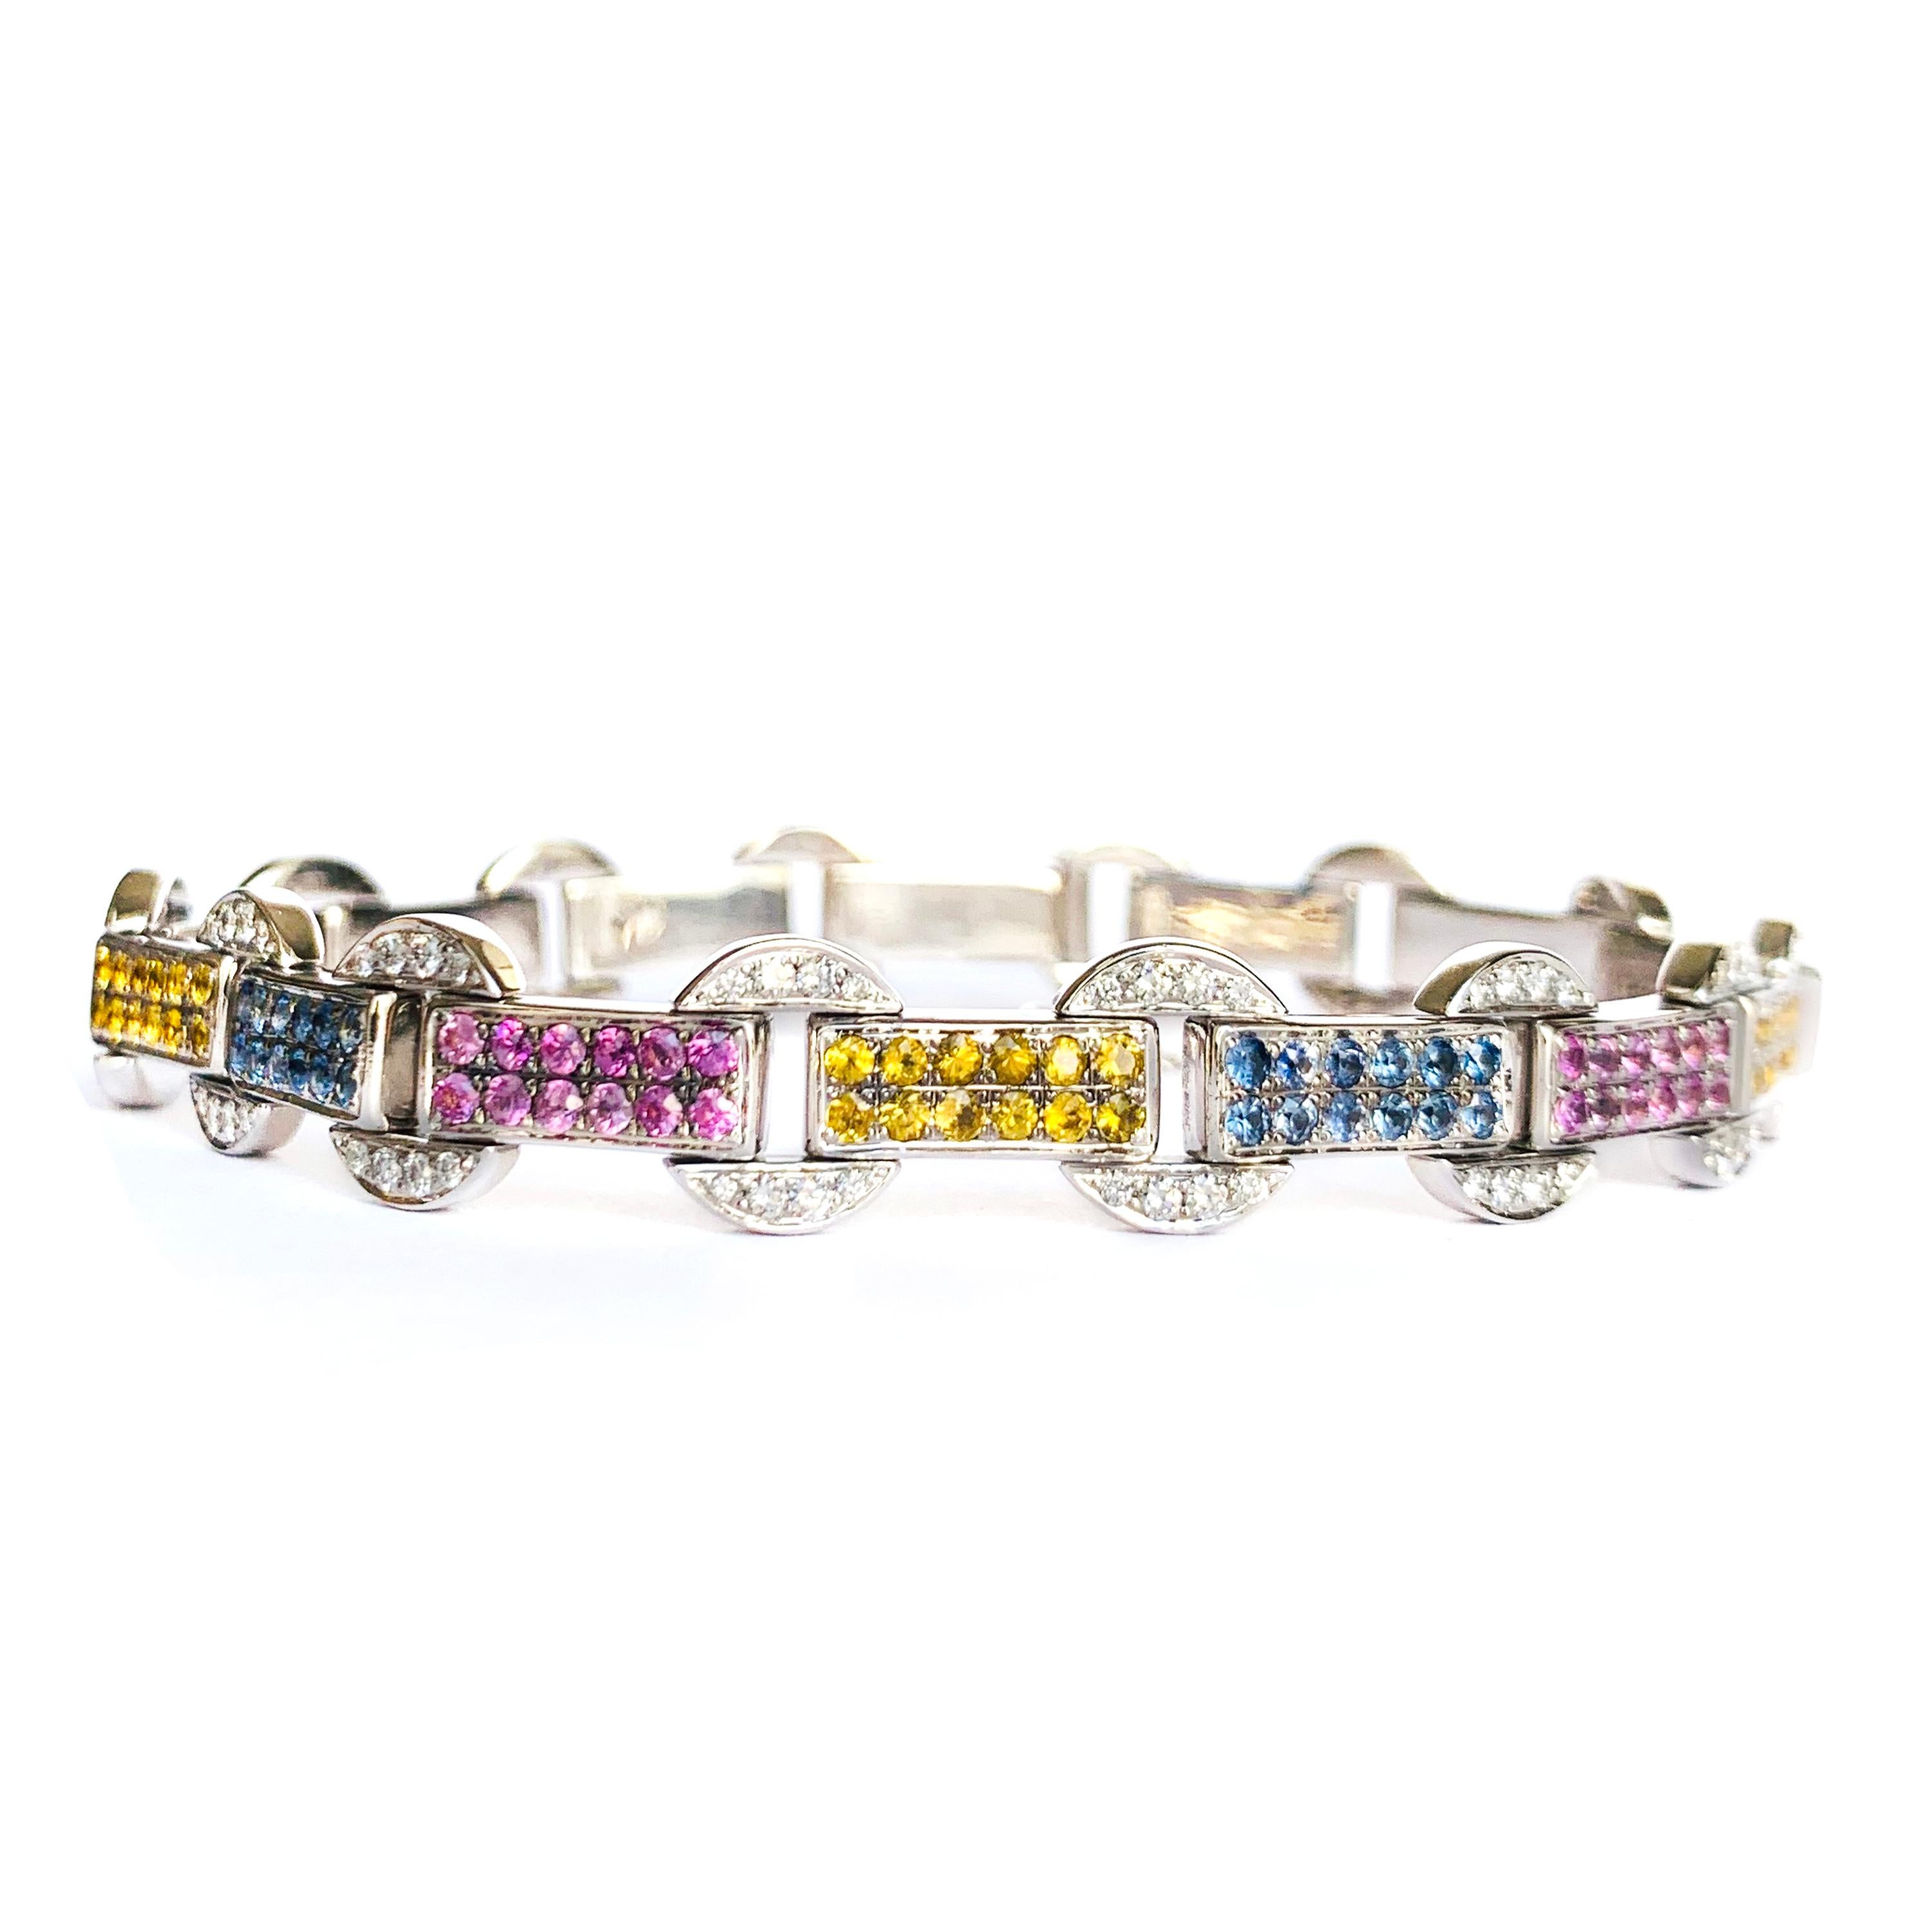 Rosior by Manuel Rosas contemporary 19,2k white gold bracelet setted with:
- 112 diamonds with 0,94ct,
- 167 blue, yellow and pink sapphires with 3,34ct.
The bracelet is totally articulated and 